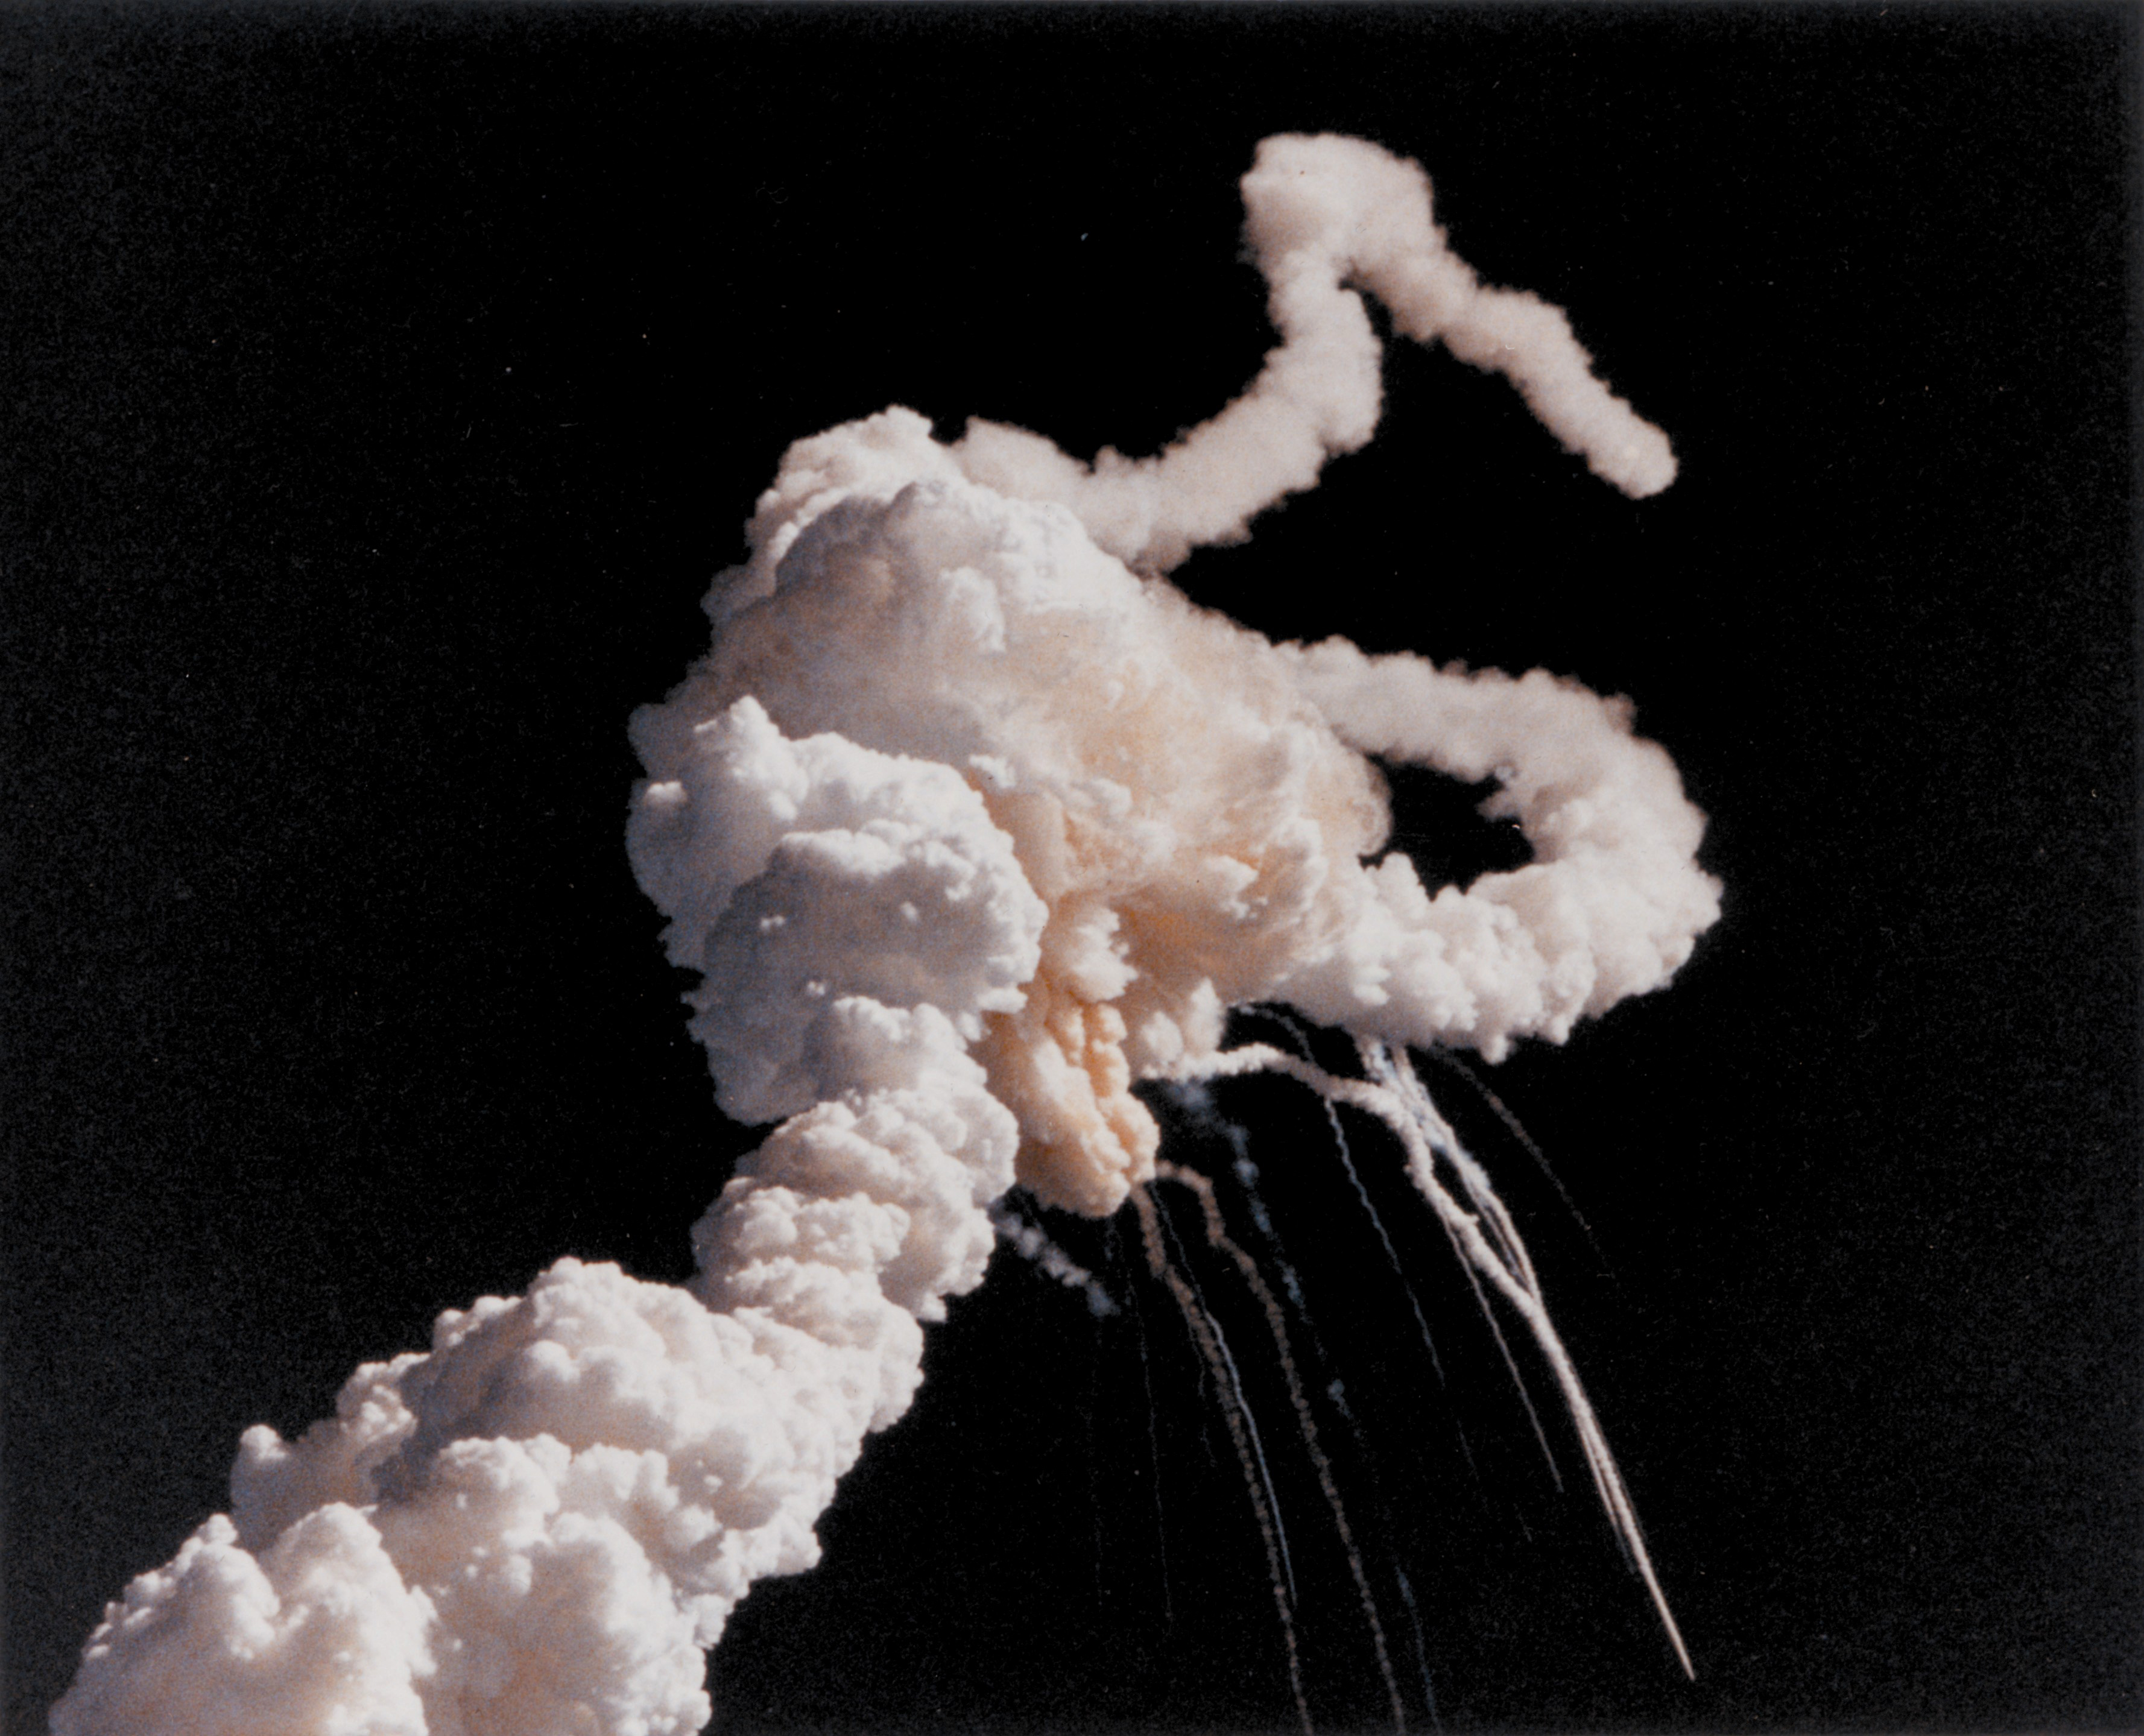 The Space Shuttle Challenger and her seven-member crew were lost when a ruptured O-ring in the right Solid Rocket Booster caused an explosion soon after launch from the Kennedy Space Center in this NASA handout photo dated January 28, 1986. REUTERS/NASA/Handout 